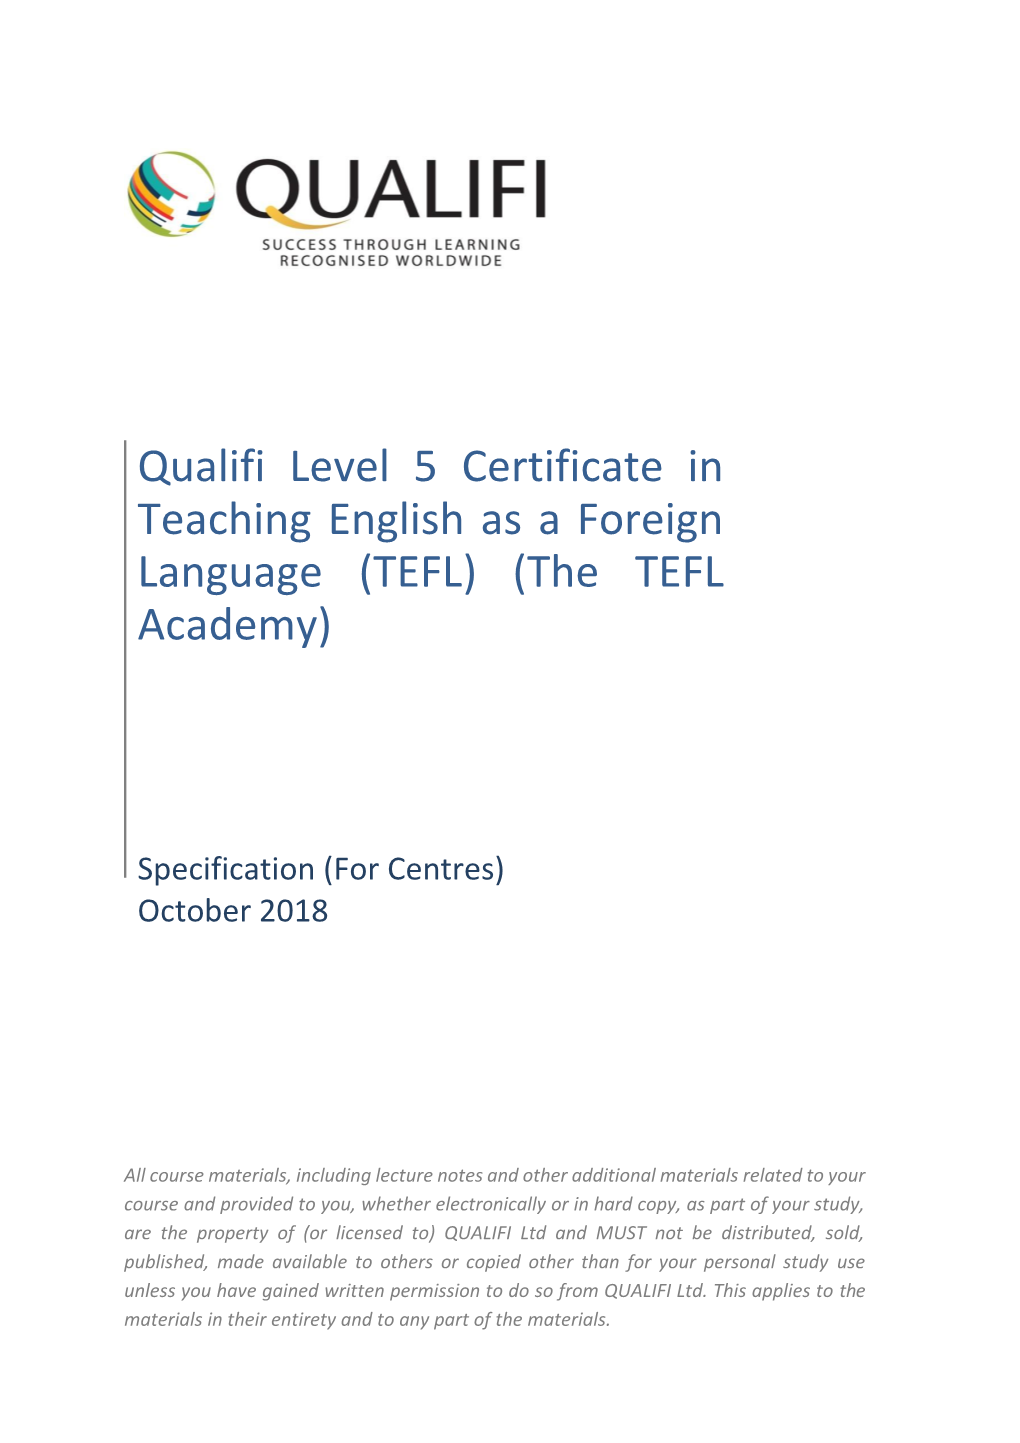 Qualifi Level 5 Certificate in Teaching English As a Foreign Language (TEFL) (The TEFL Academy)